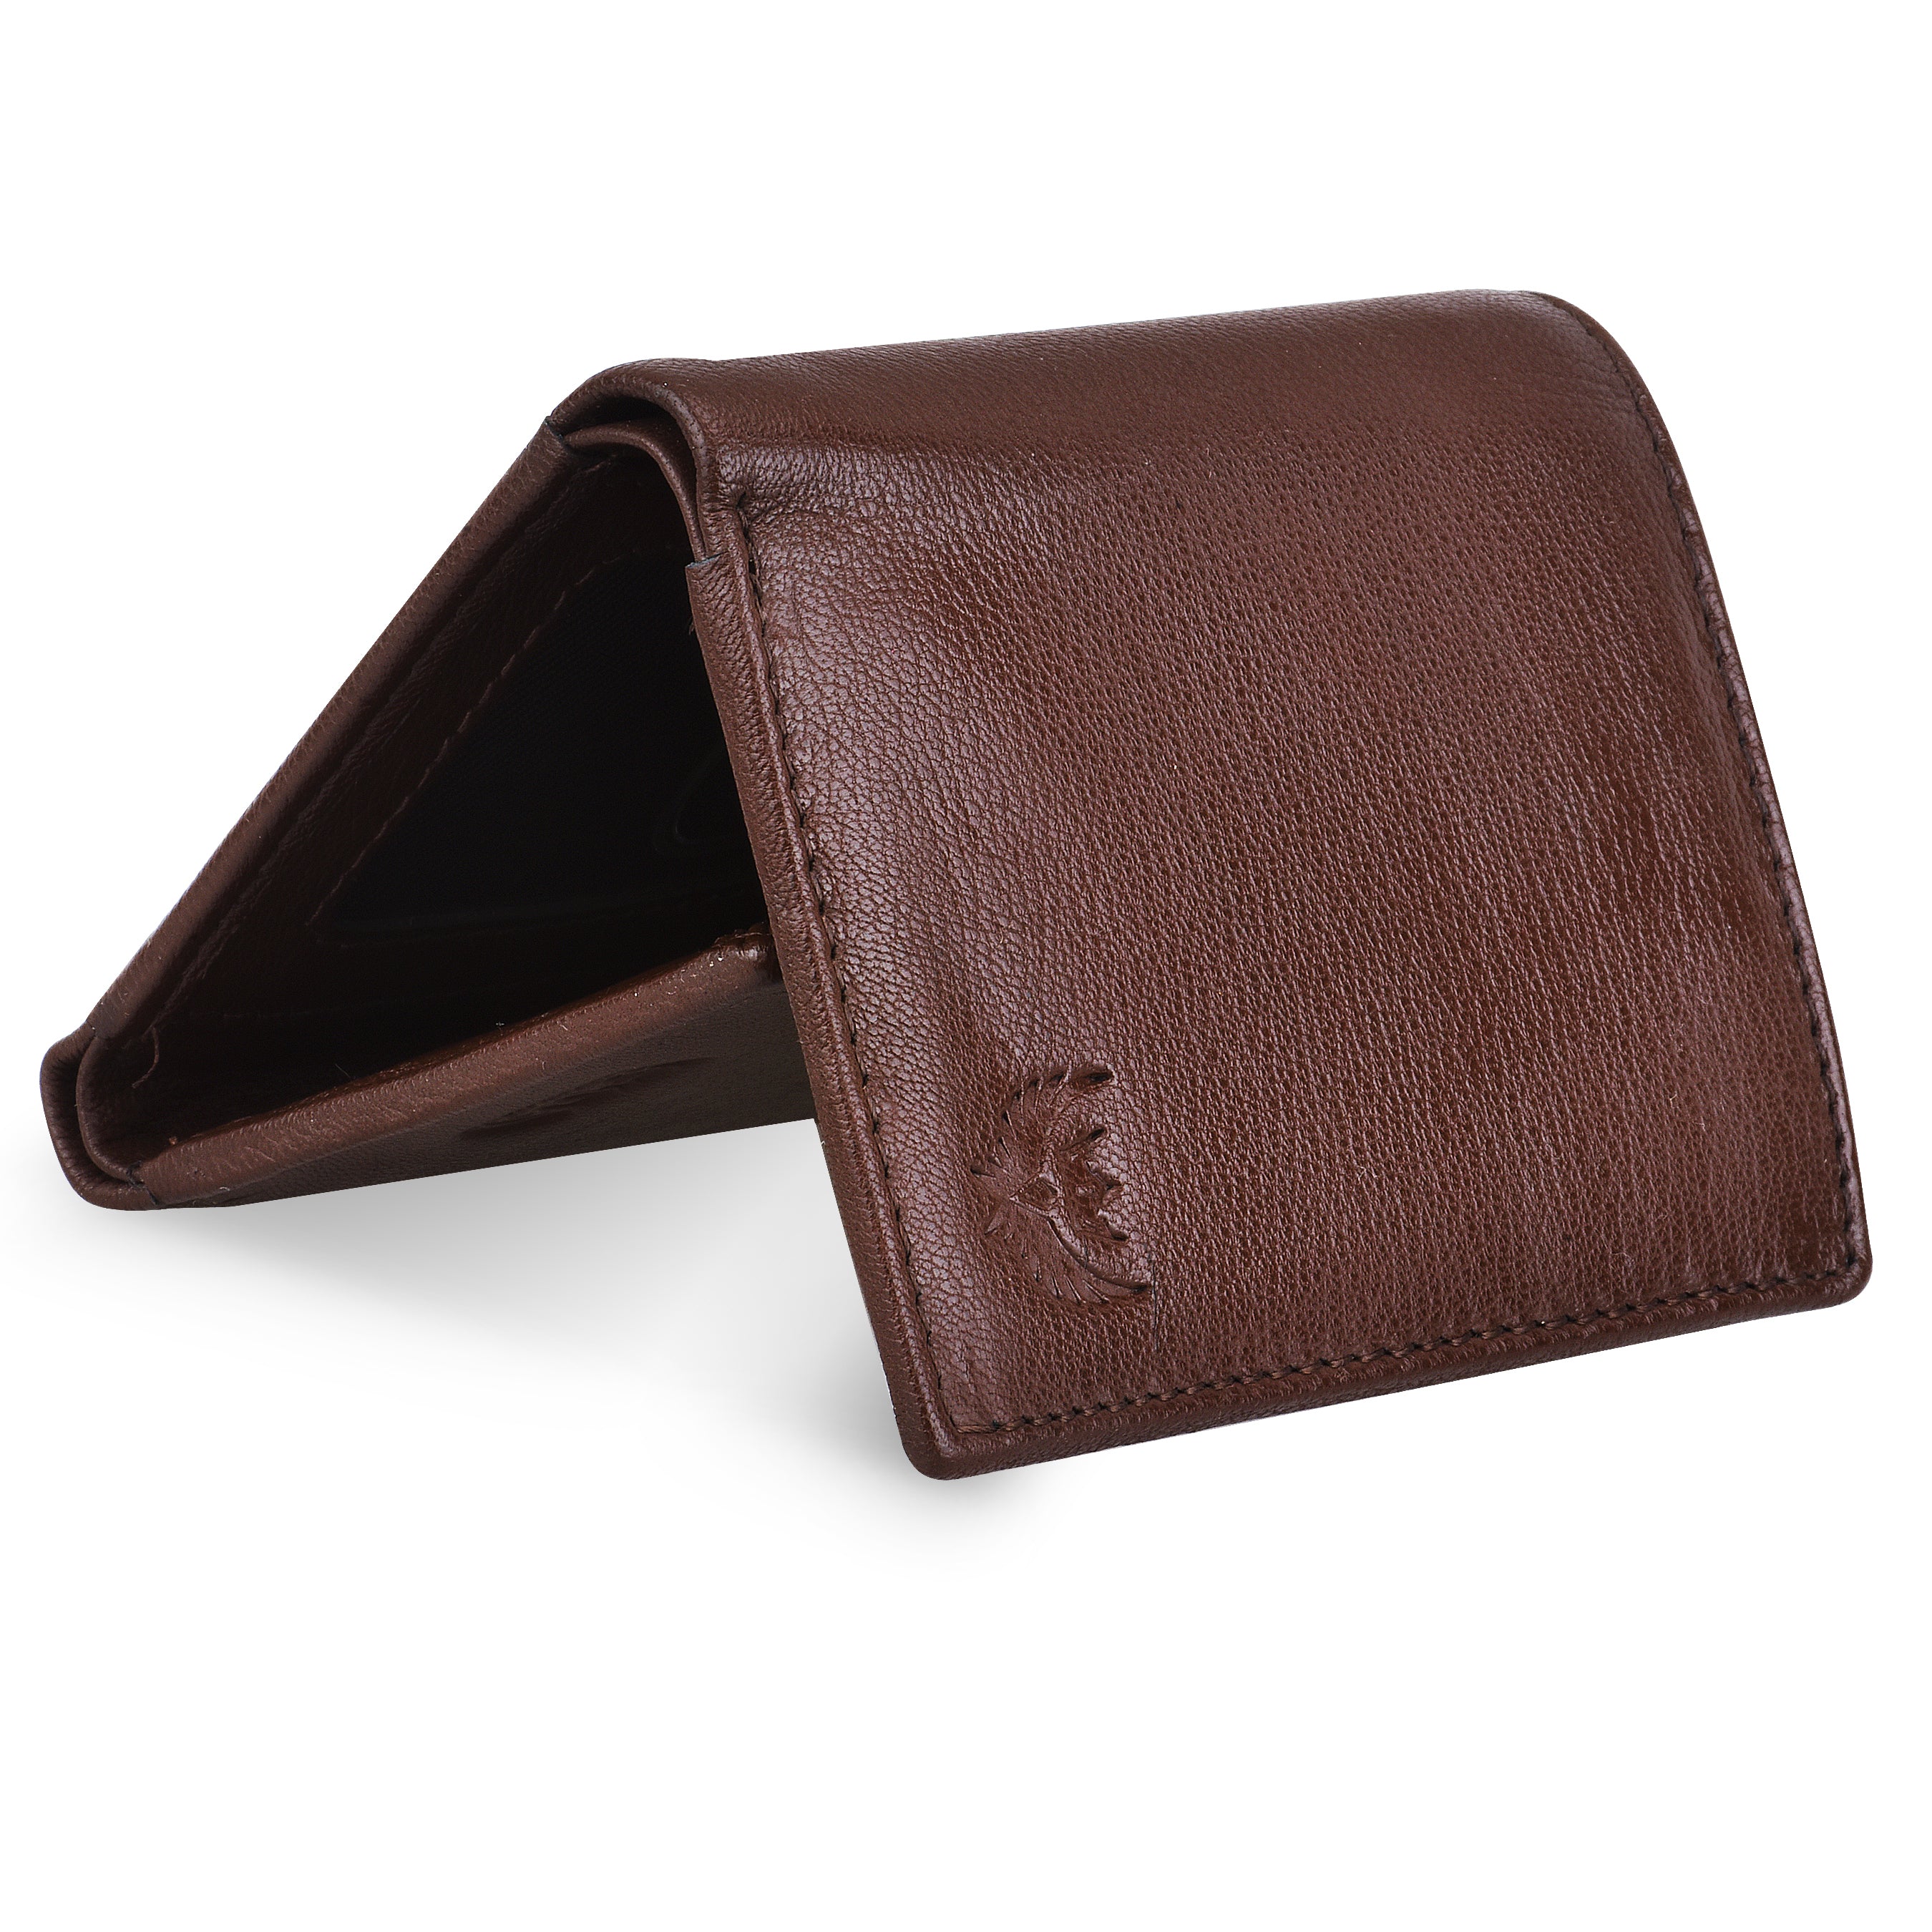 Men's RFID-Blocking Leather Wallet with ID Slot - TriFold Closure in Umber Brown